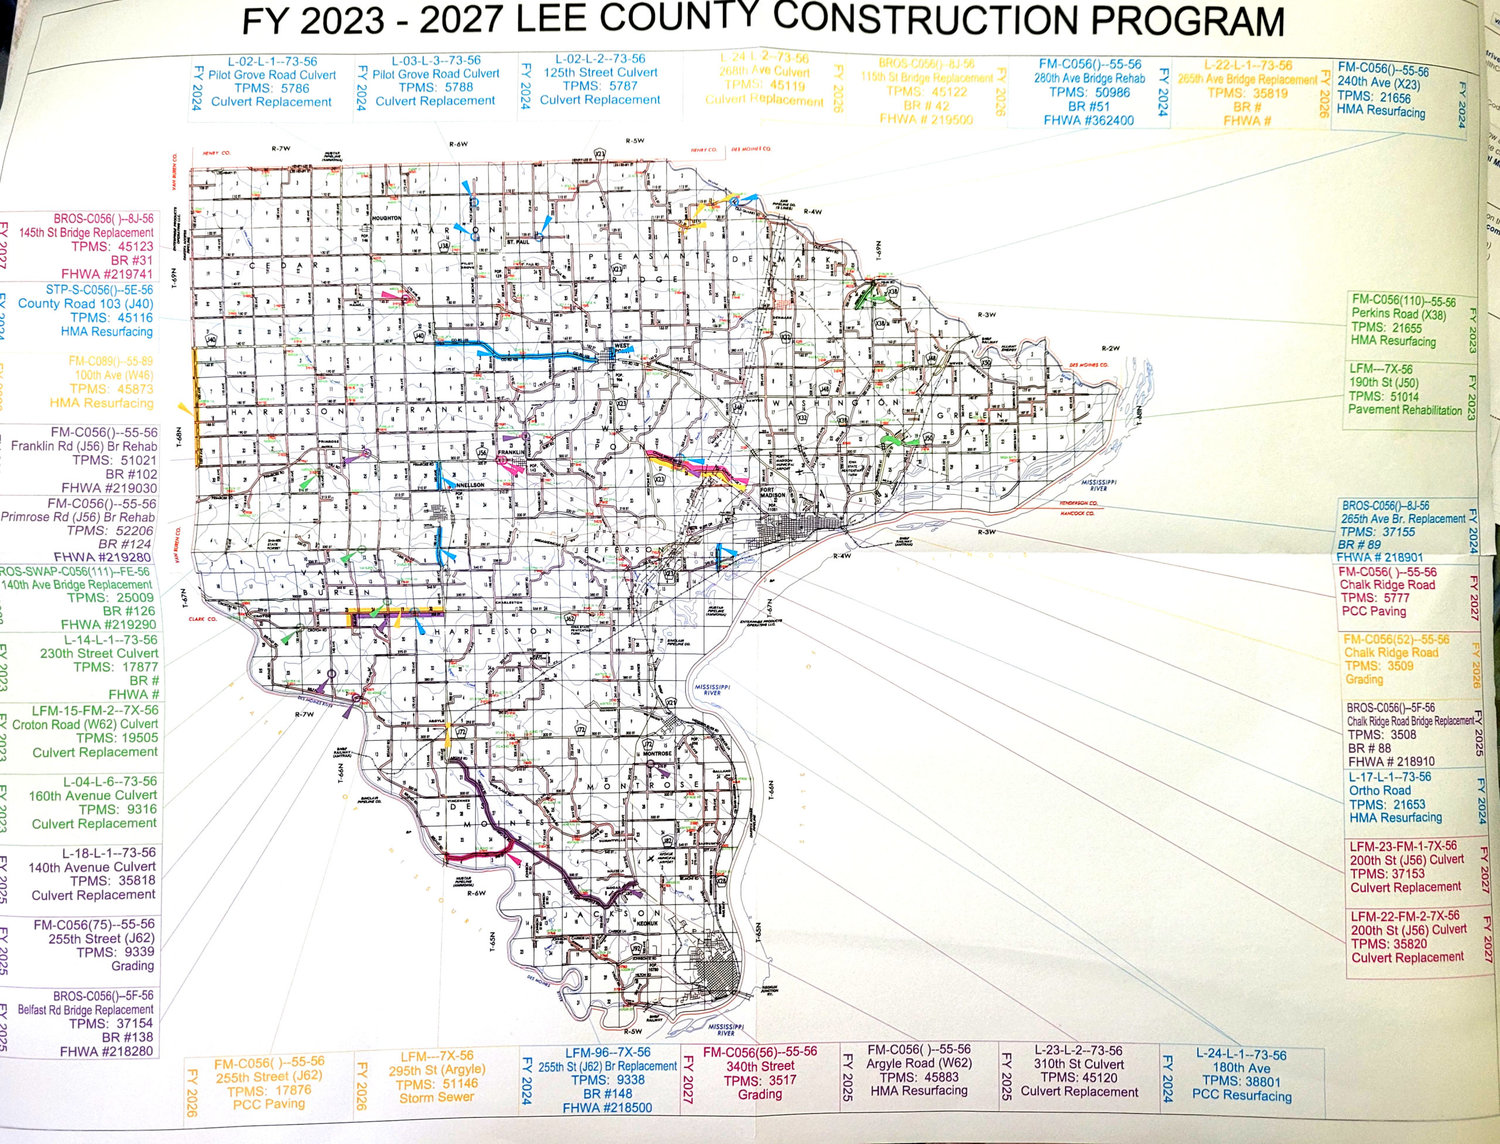 A map from the Lee County Engineer shows some preliminary plans for the next five years for the county. County Engineer Ben Hull said the plans could change based on funding formulas at the local, state, and federal levels.